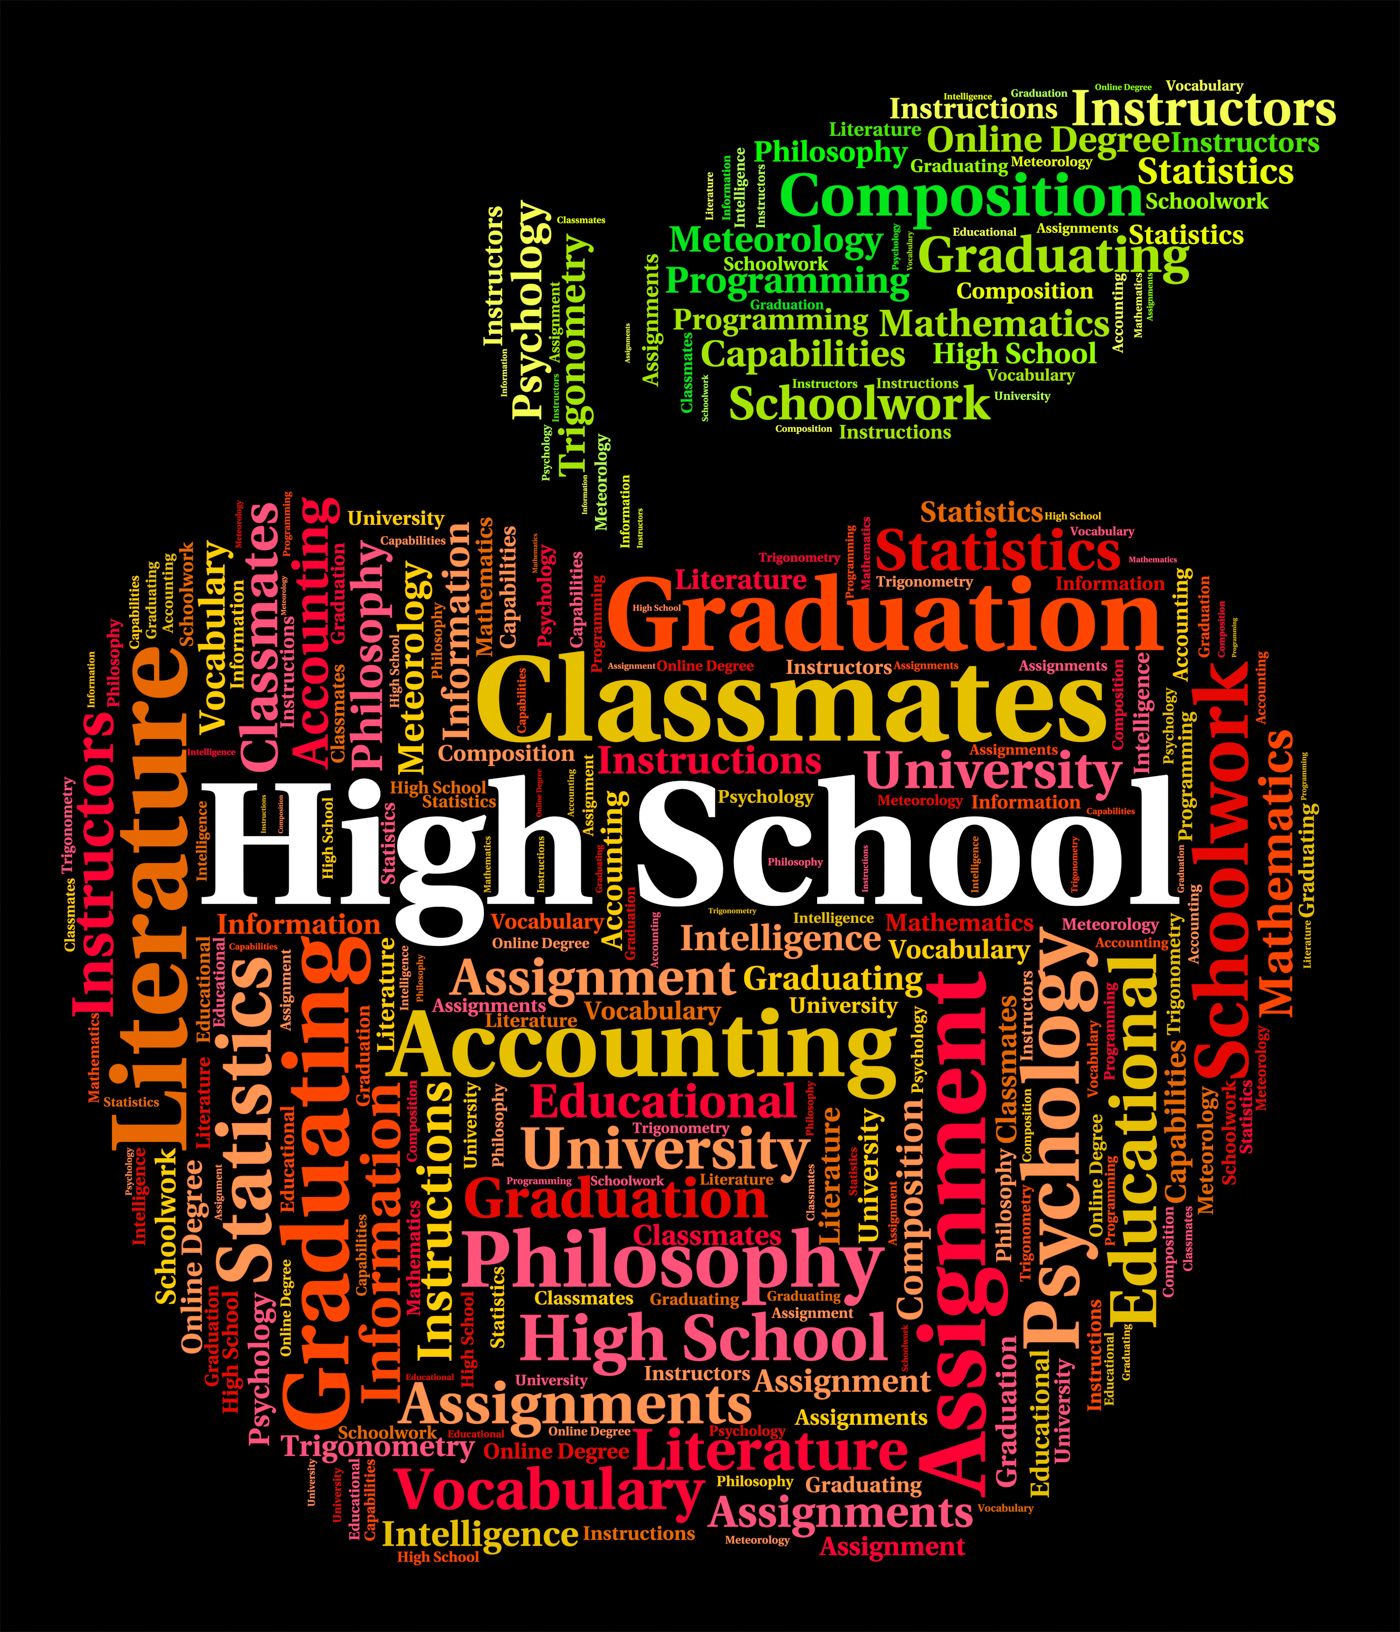 High school indicates colleges word and text photo